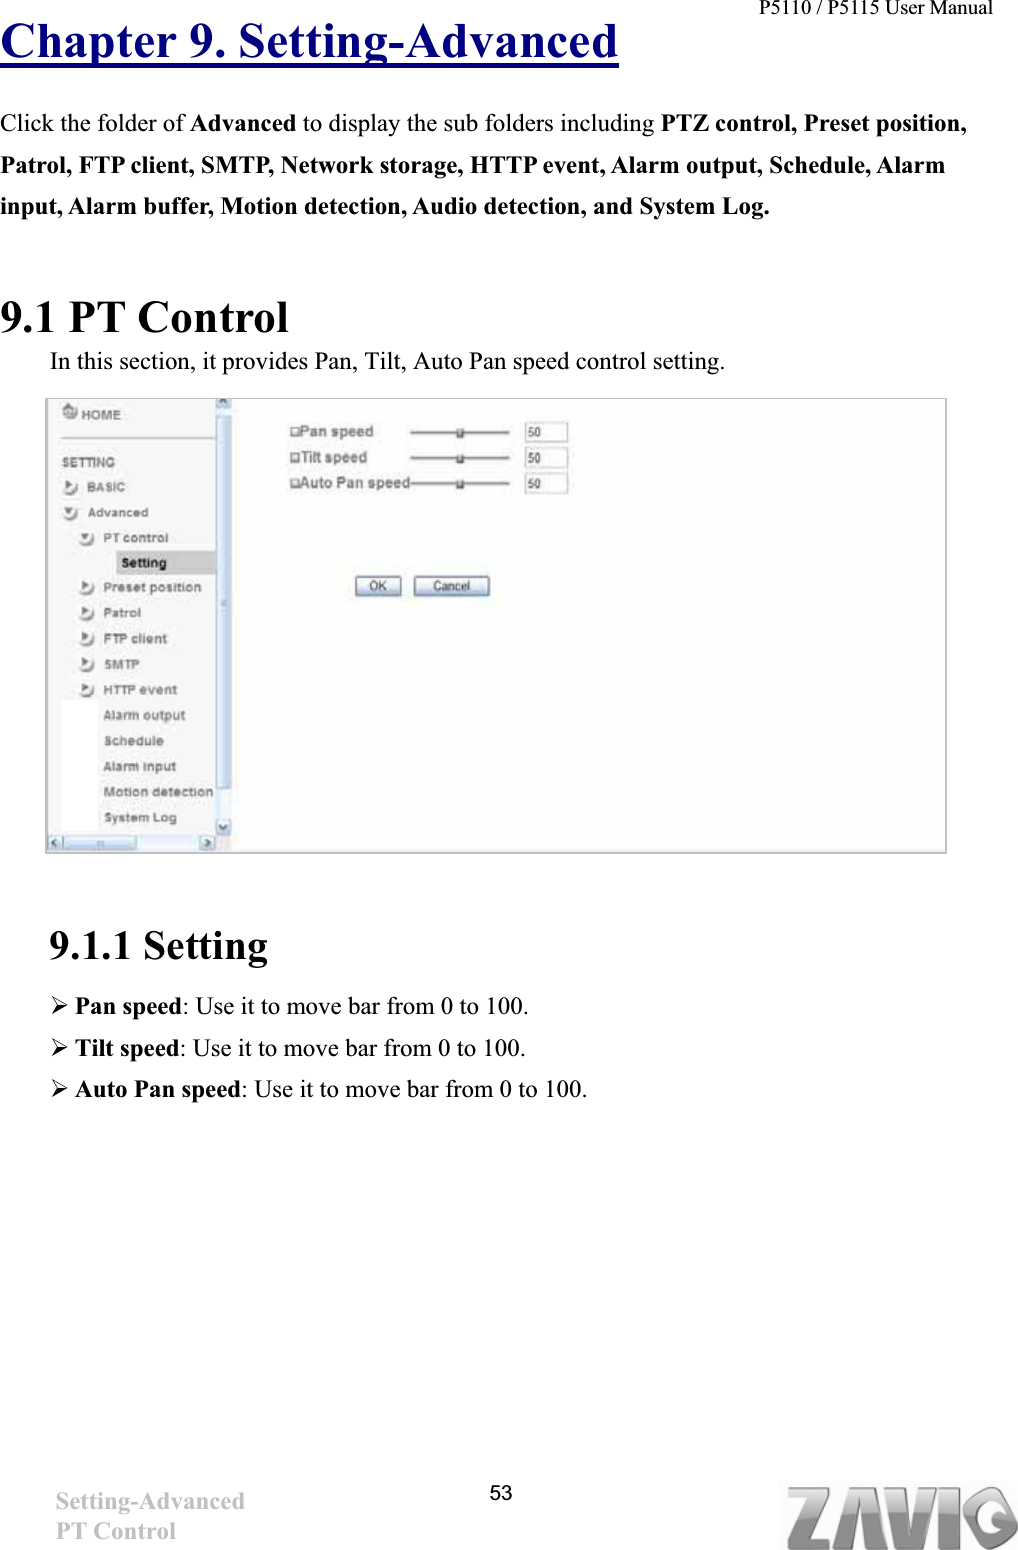 P5110 / P5115 User Manual   53Chapter 9. Setting-AdvancedClick the folder of Advanced to display the sub folders including PTZ control, Preset position, Patrol, FTP client, SMTP, Network storage, HTTP event, Alarm output, Schedule, Alarm input, Alarm buffer, Motion detection, Audio detection, and System Log. 9.1 PT Control In this section, it provides Pan, Tilt, Auto Pan speed control setting. 9.1.1 Setting ¾Pan speed: Use it to move bar from 0 to 100. ¾Tilt speed: Use it to move bar from 0 to 100. ¾Auto Pan speed: Use it to move bar from 0 to 100. Setting-AdvancedPT Control 